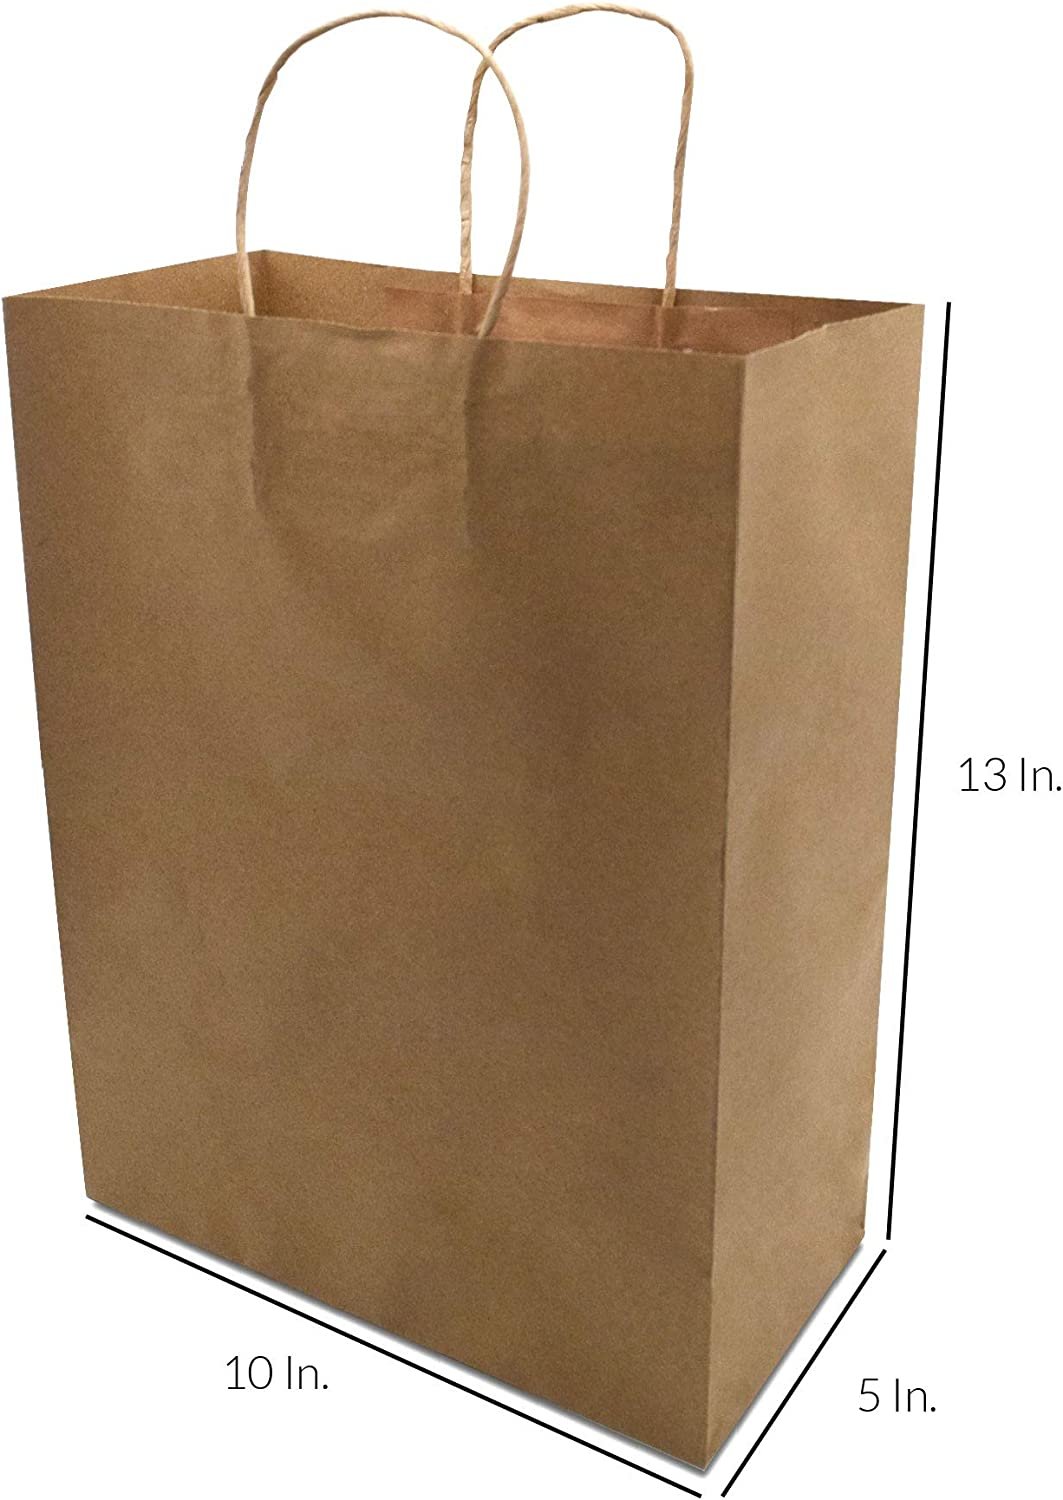 Gift Bags Assorted Sizes - 75 Pack Brown Kraft Paper Shopping Bags with Handles, Craft Totes in Bulk for Boutiques, Small Business, Retails Stores, Birthday Parties, Events, Merchandise, Thank You